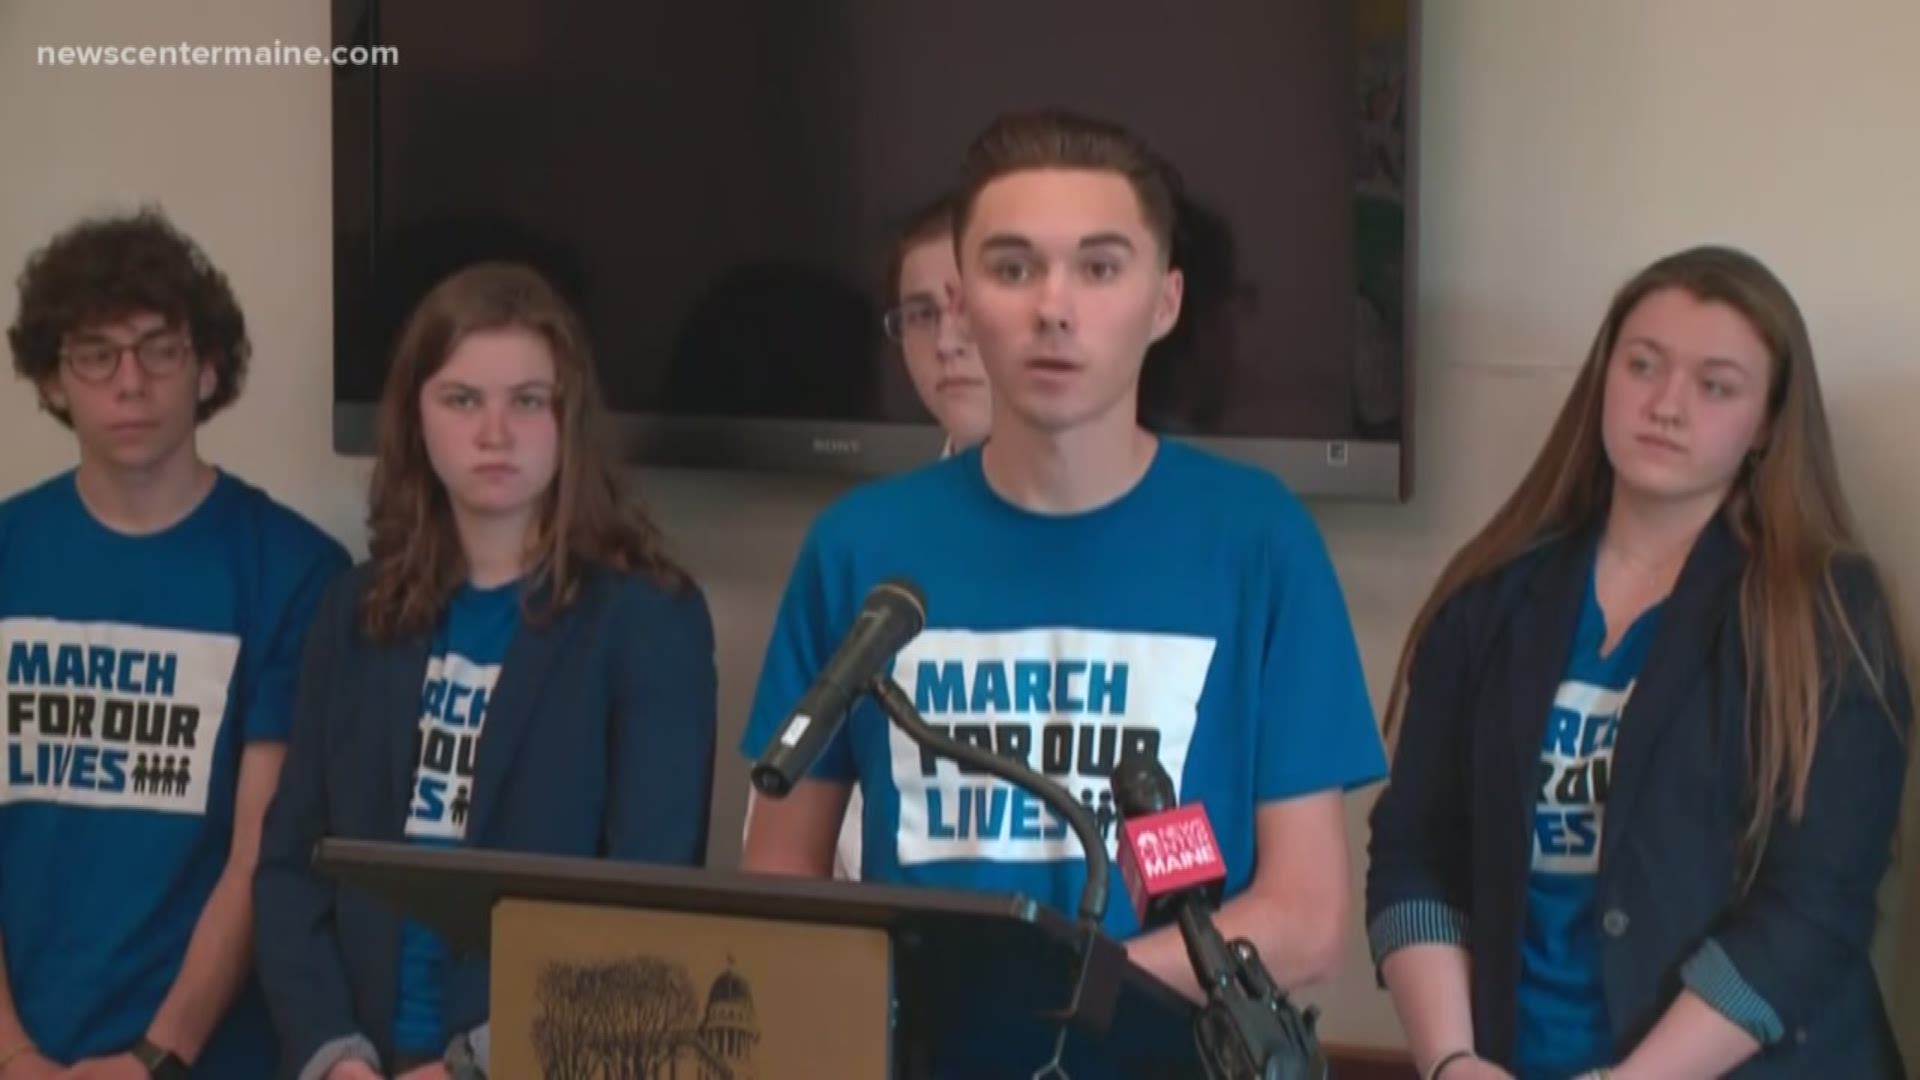 Florida survivor David Hogg was in Maine Tuesday to join other students in supporting the end of gun violence.